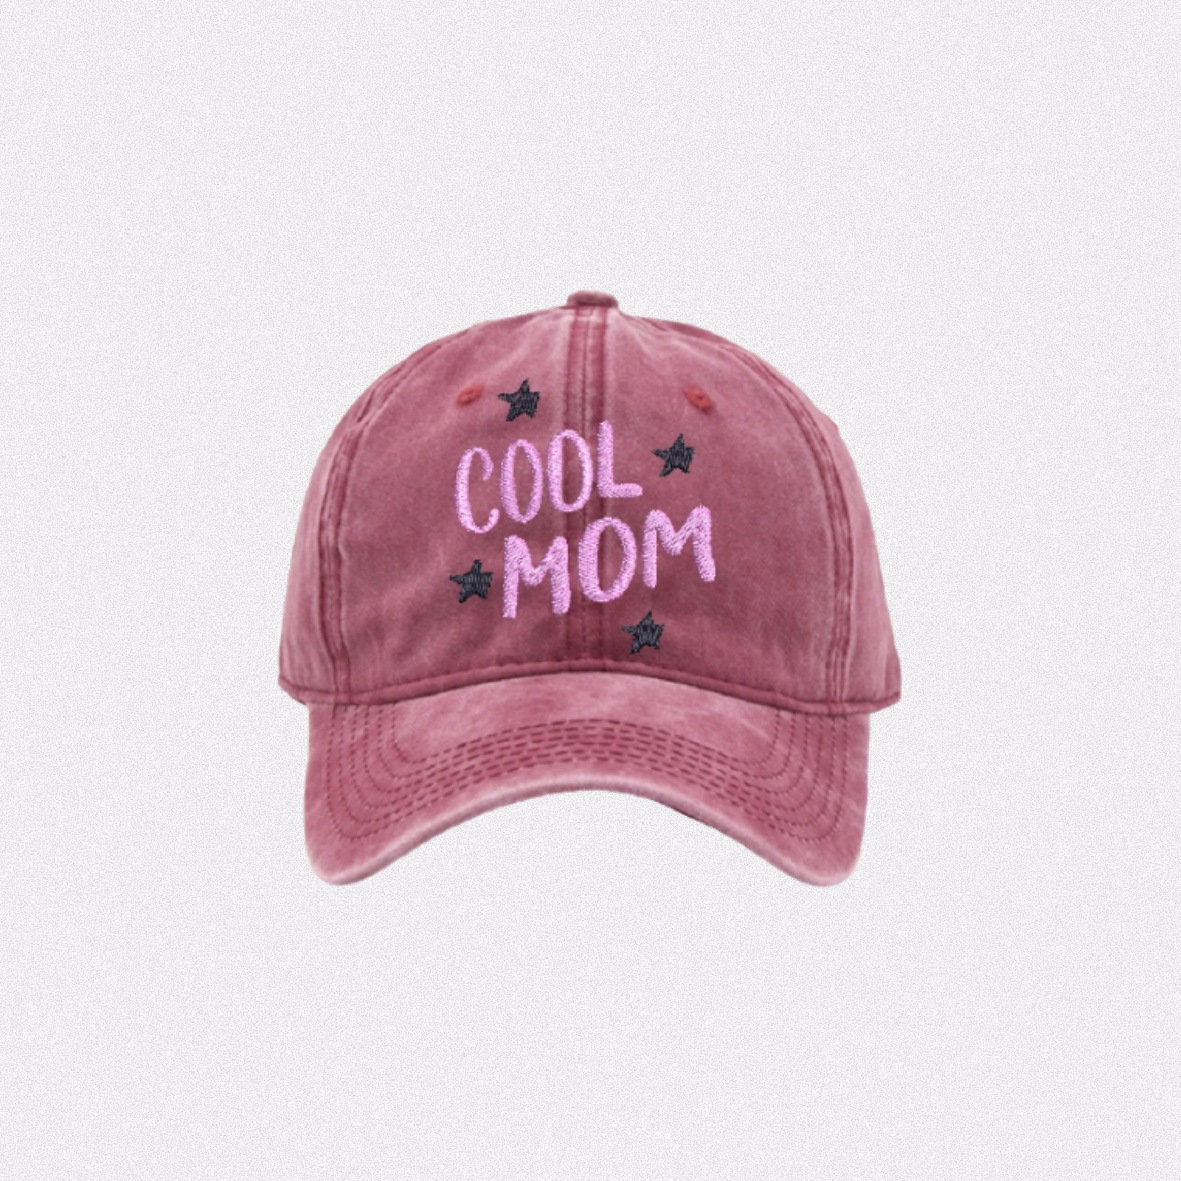 Mothers Day Mother of Dragons Trucker Caps Women Men Curved Snapback Hat 